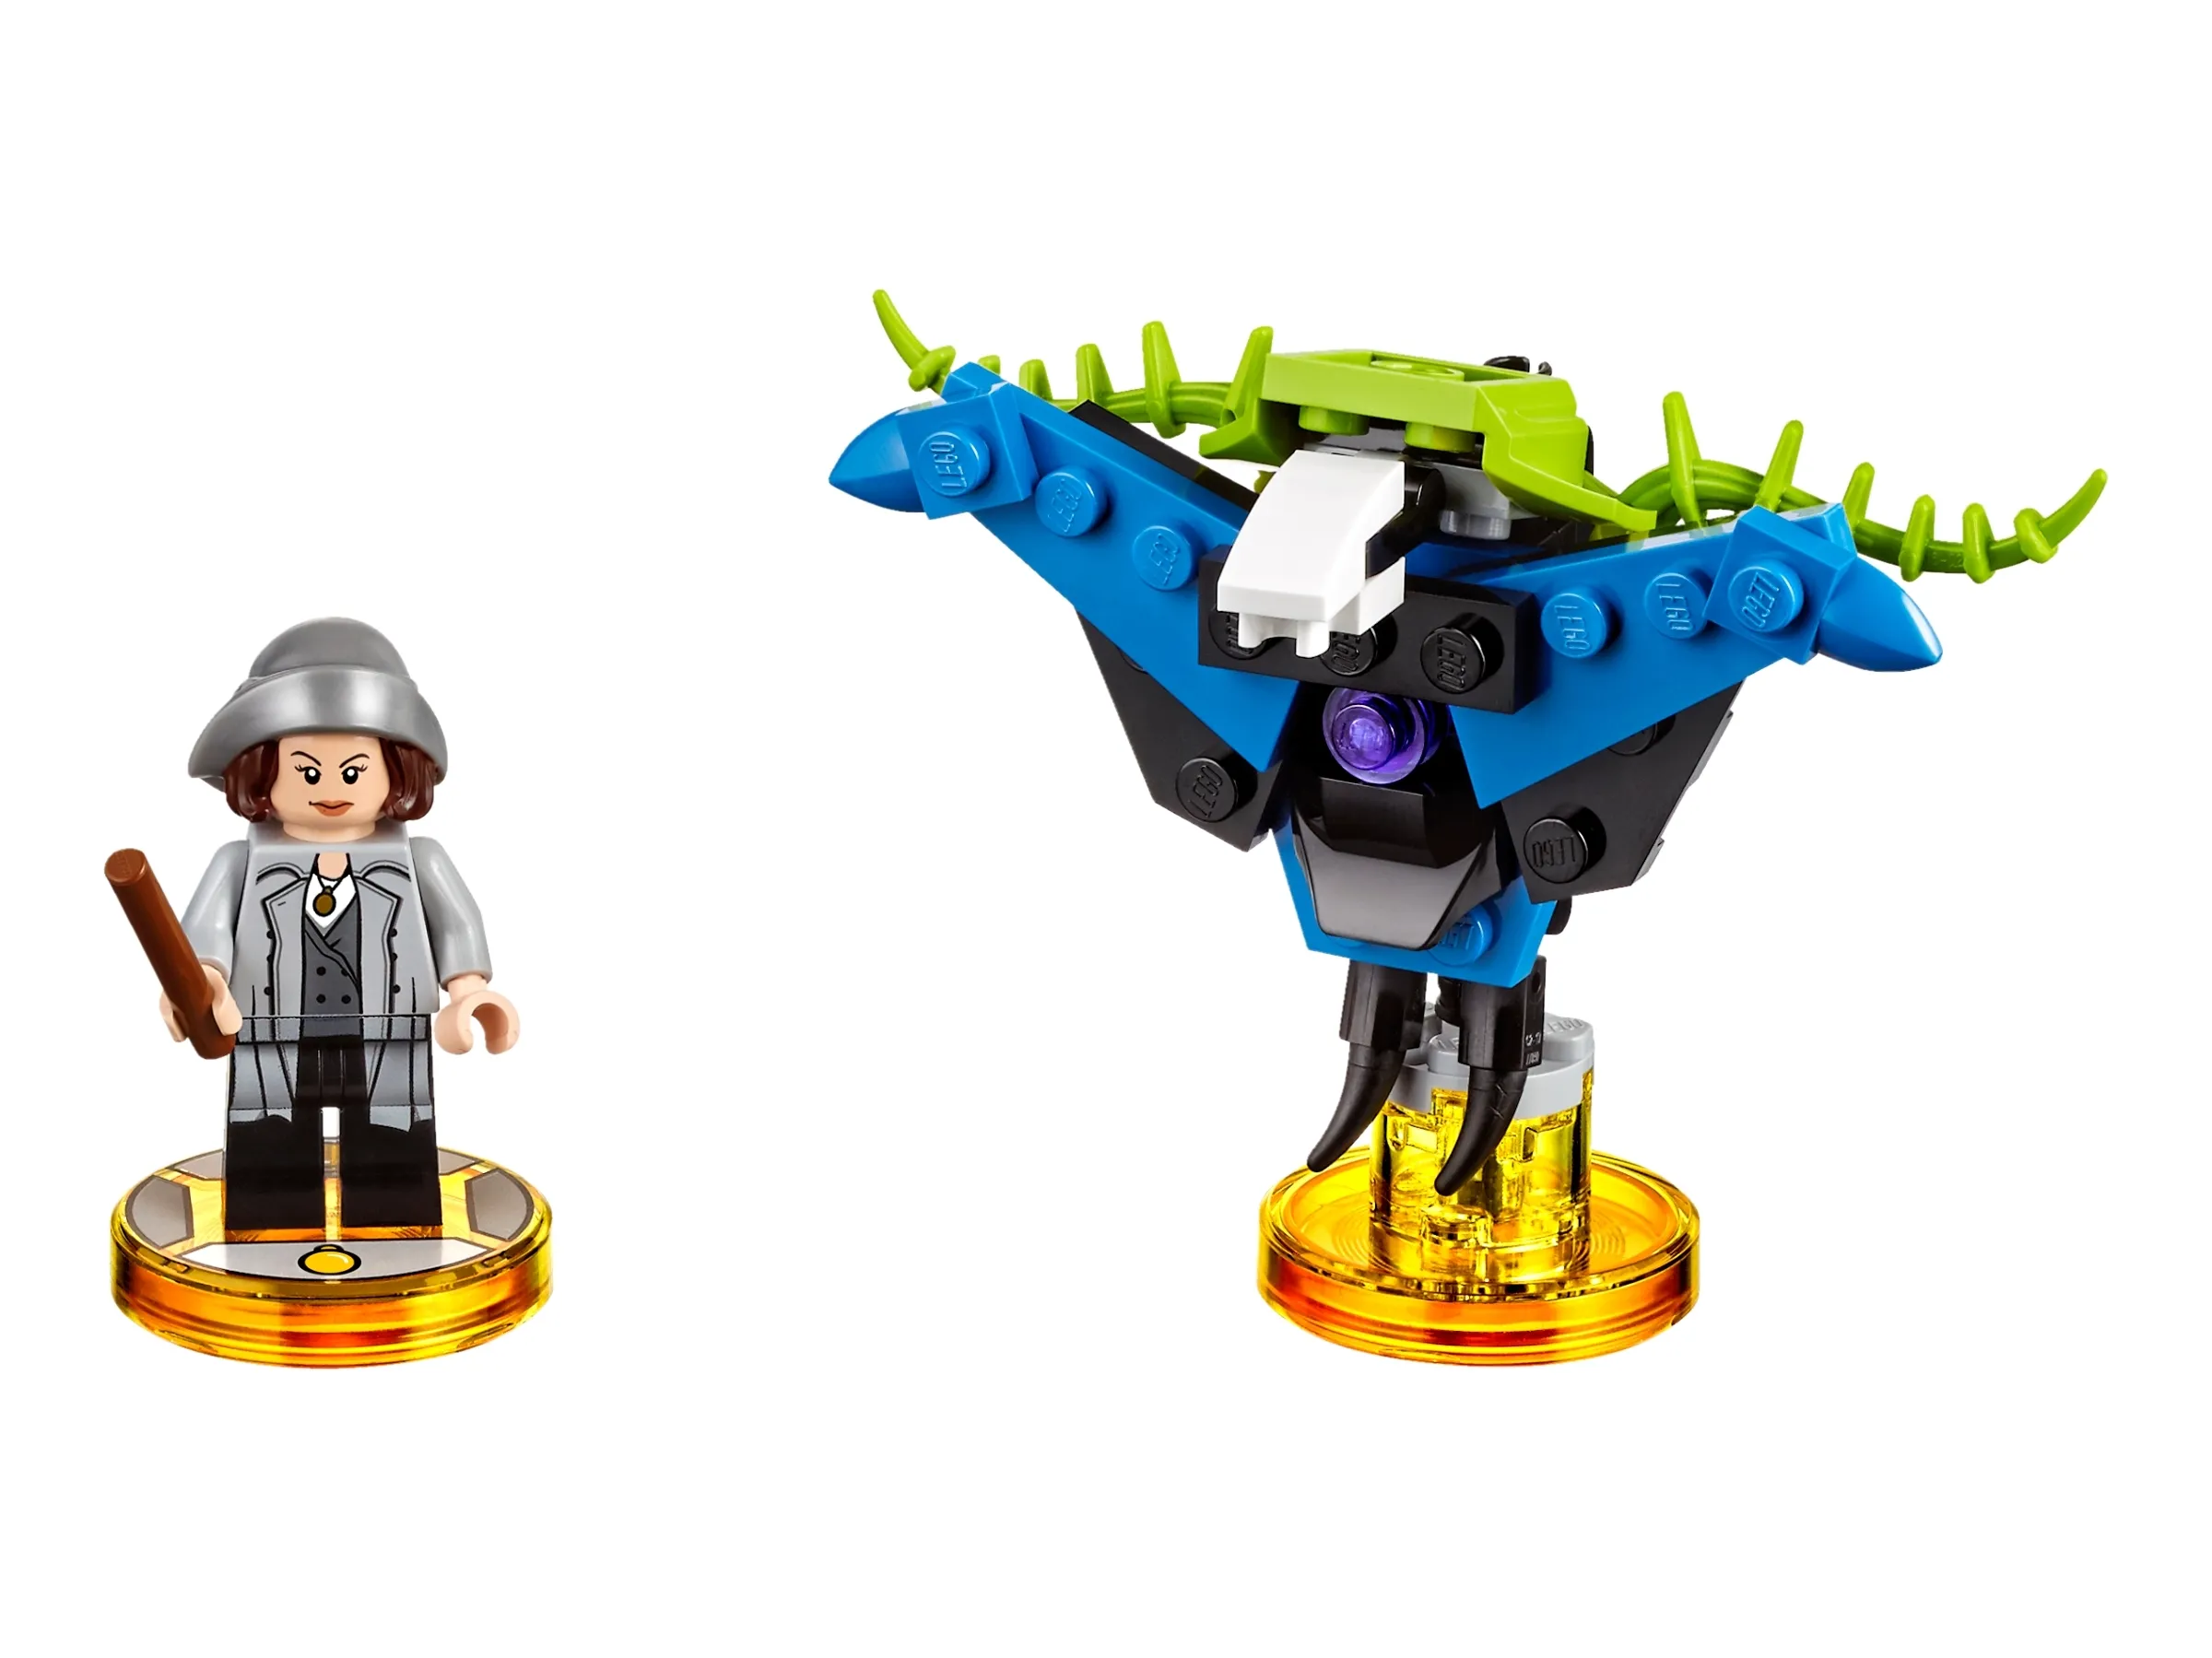 Lego Dimensions is adding new figures and adventure worlds for The